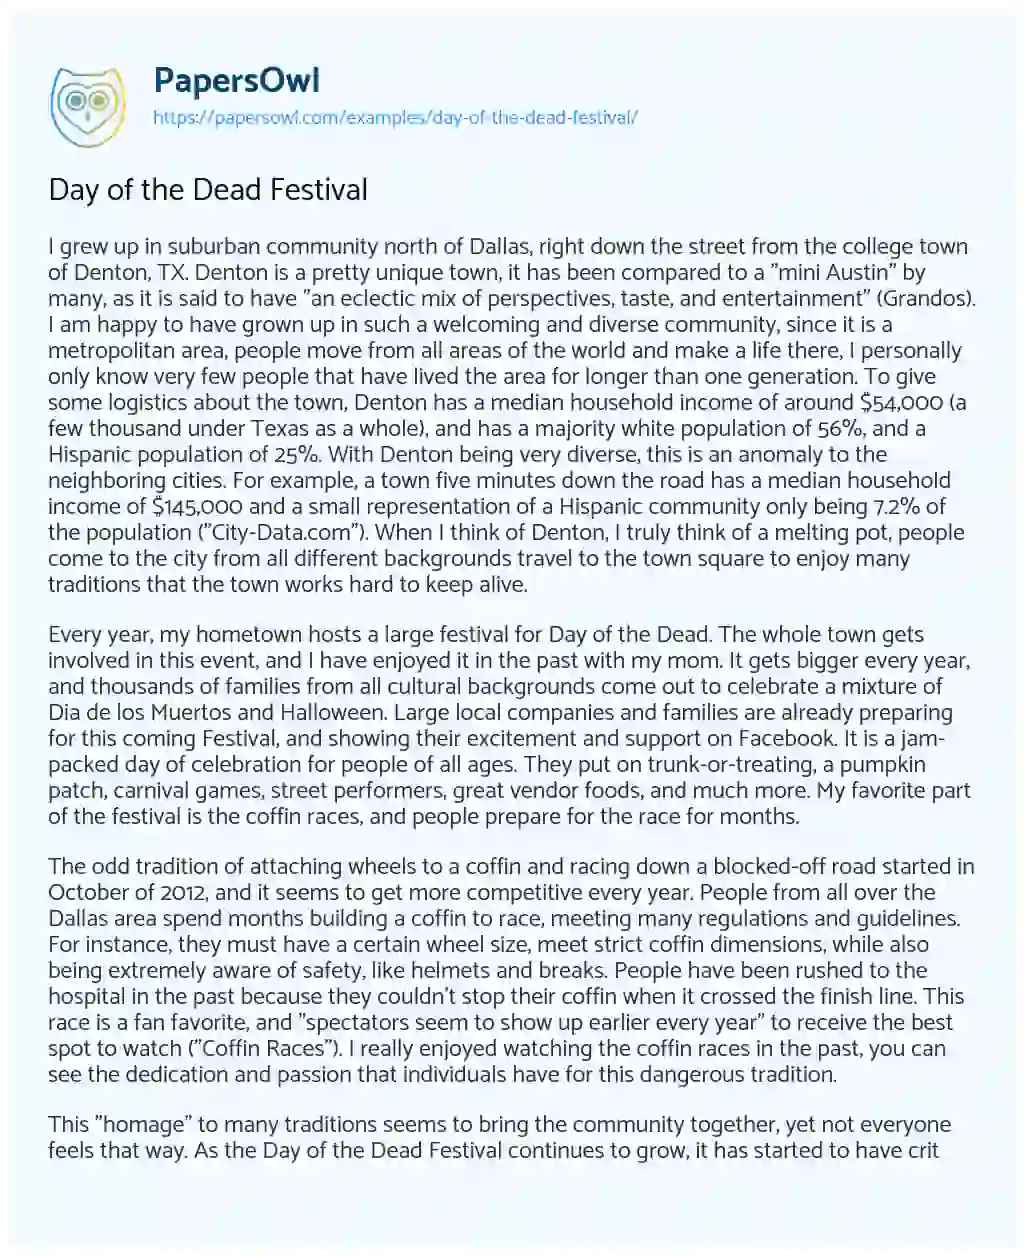 Essay on Day of the Dead Festival